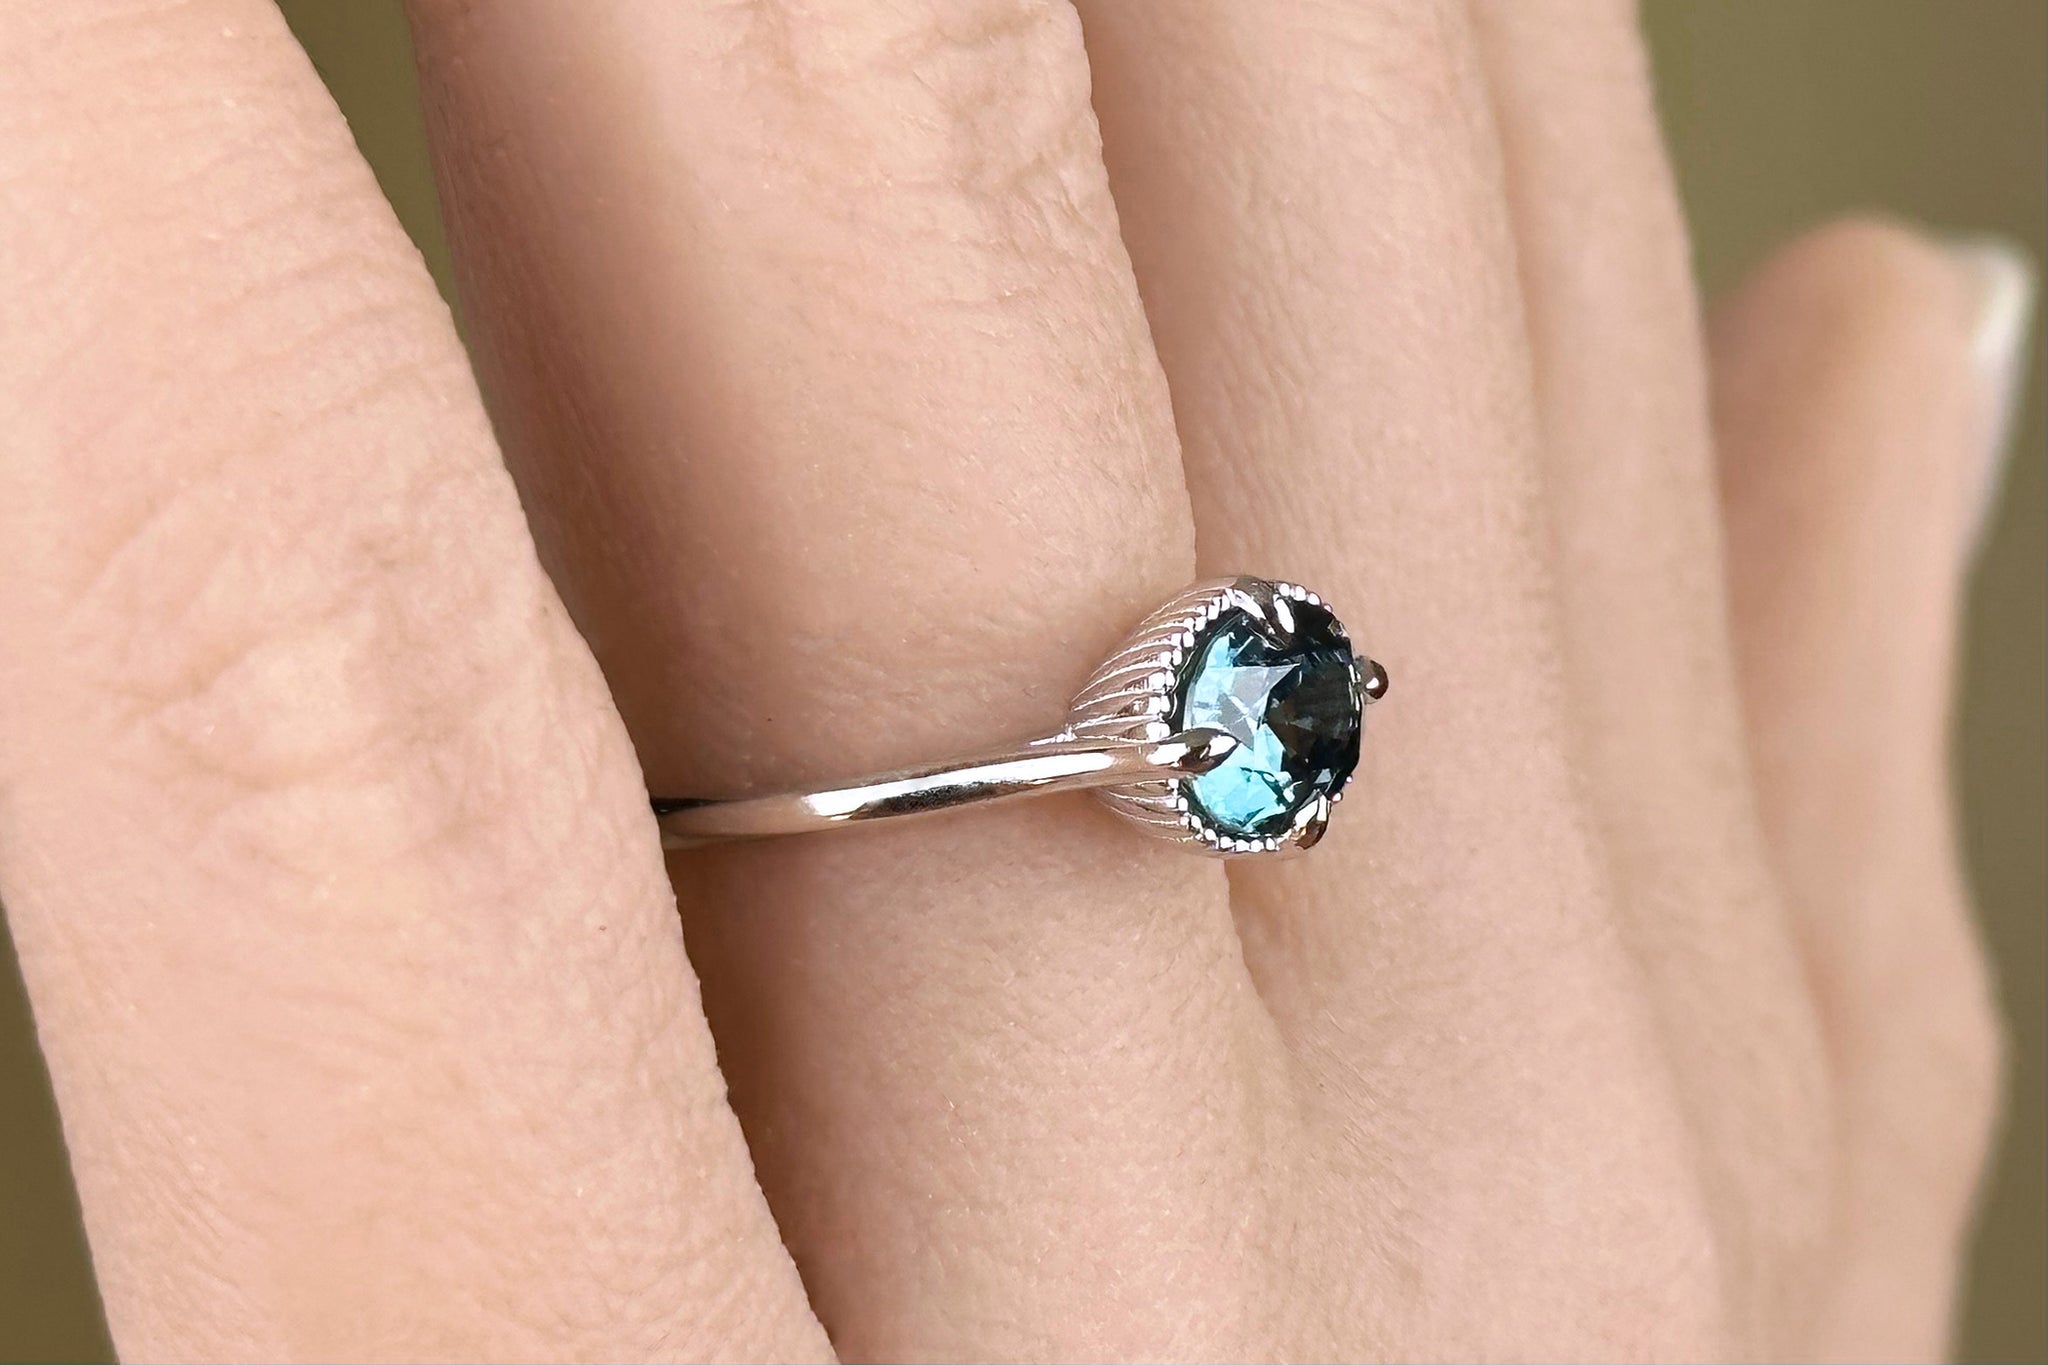 Oval Teal Untreated Sapphire Engagement Ring - S. Kind & Co